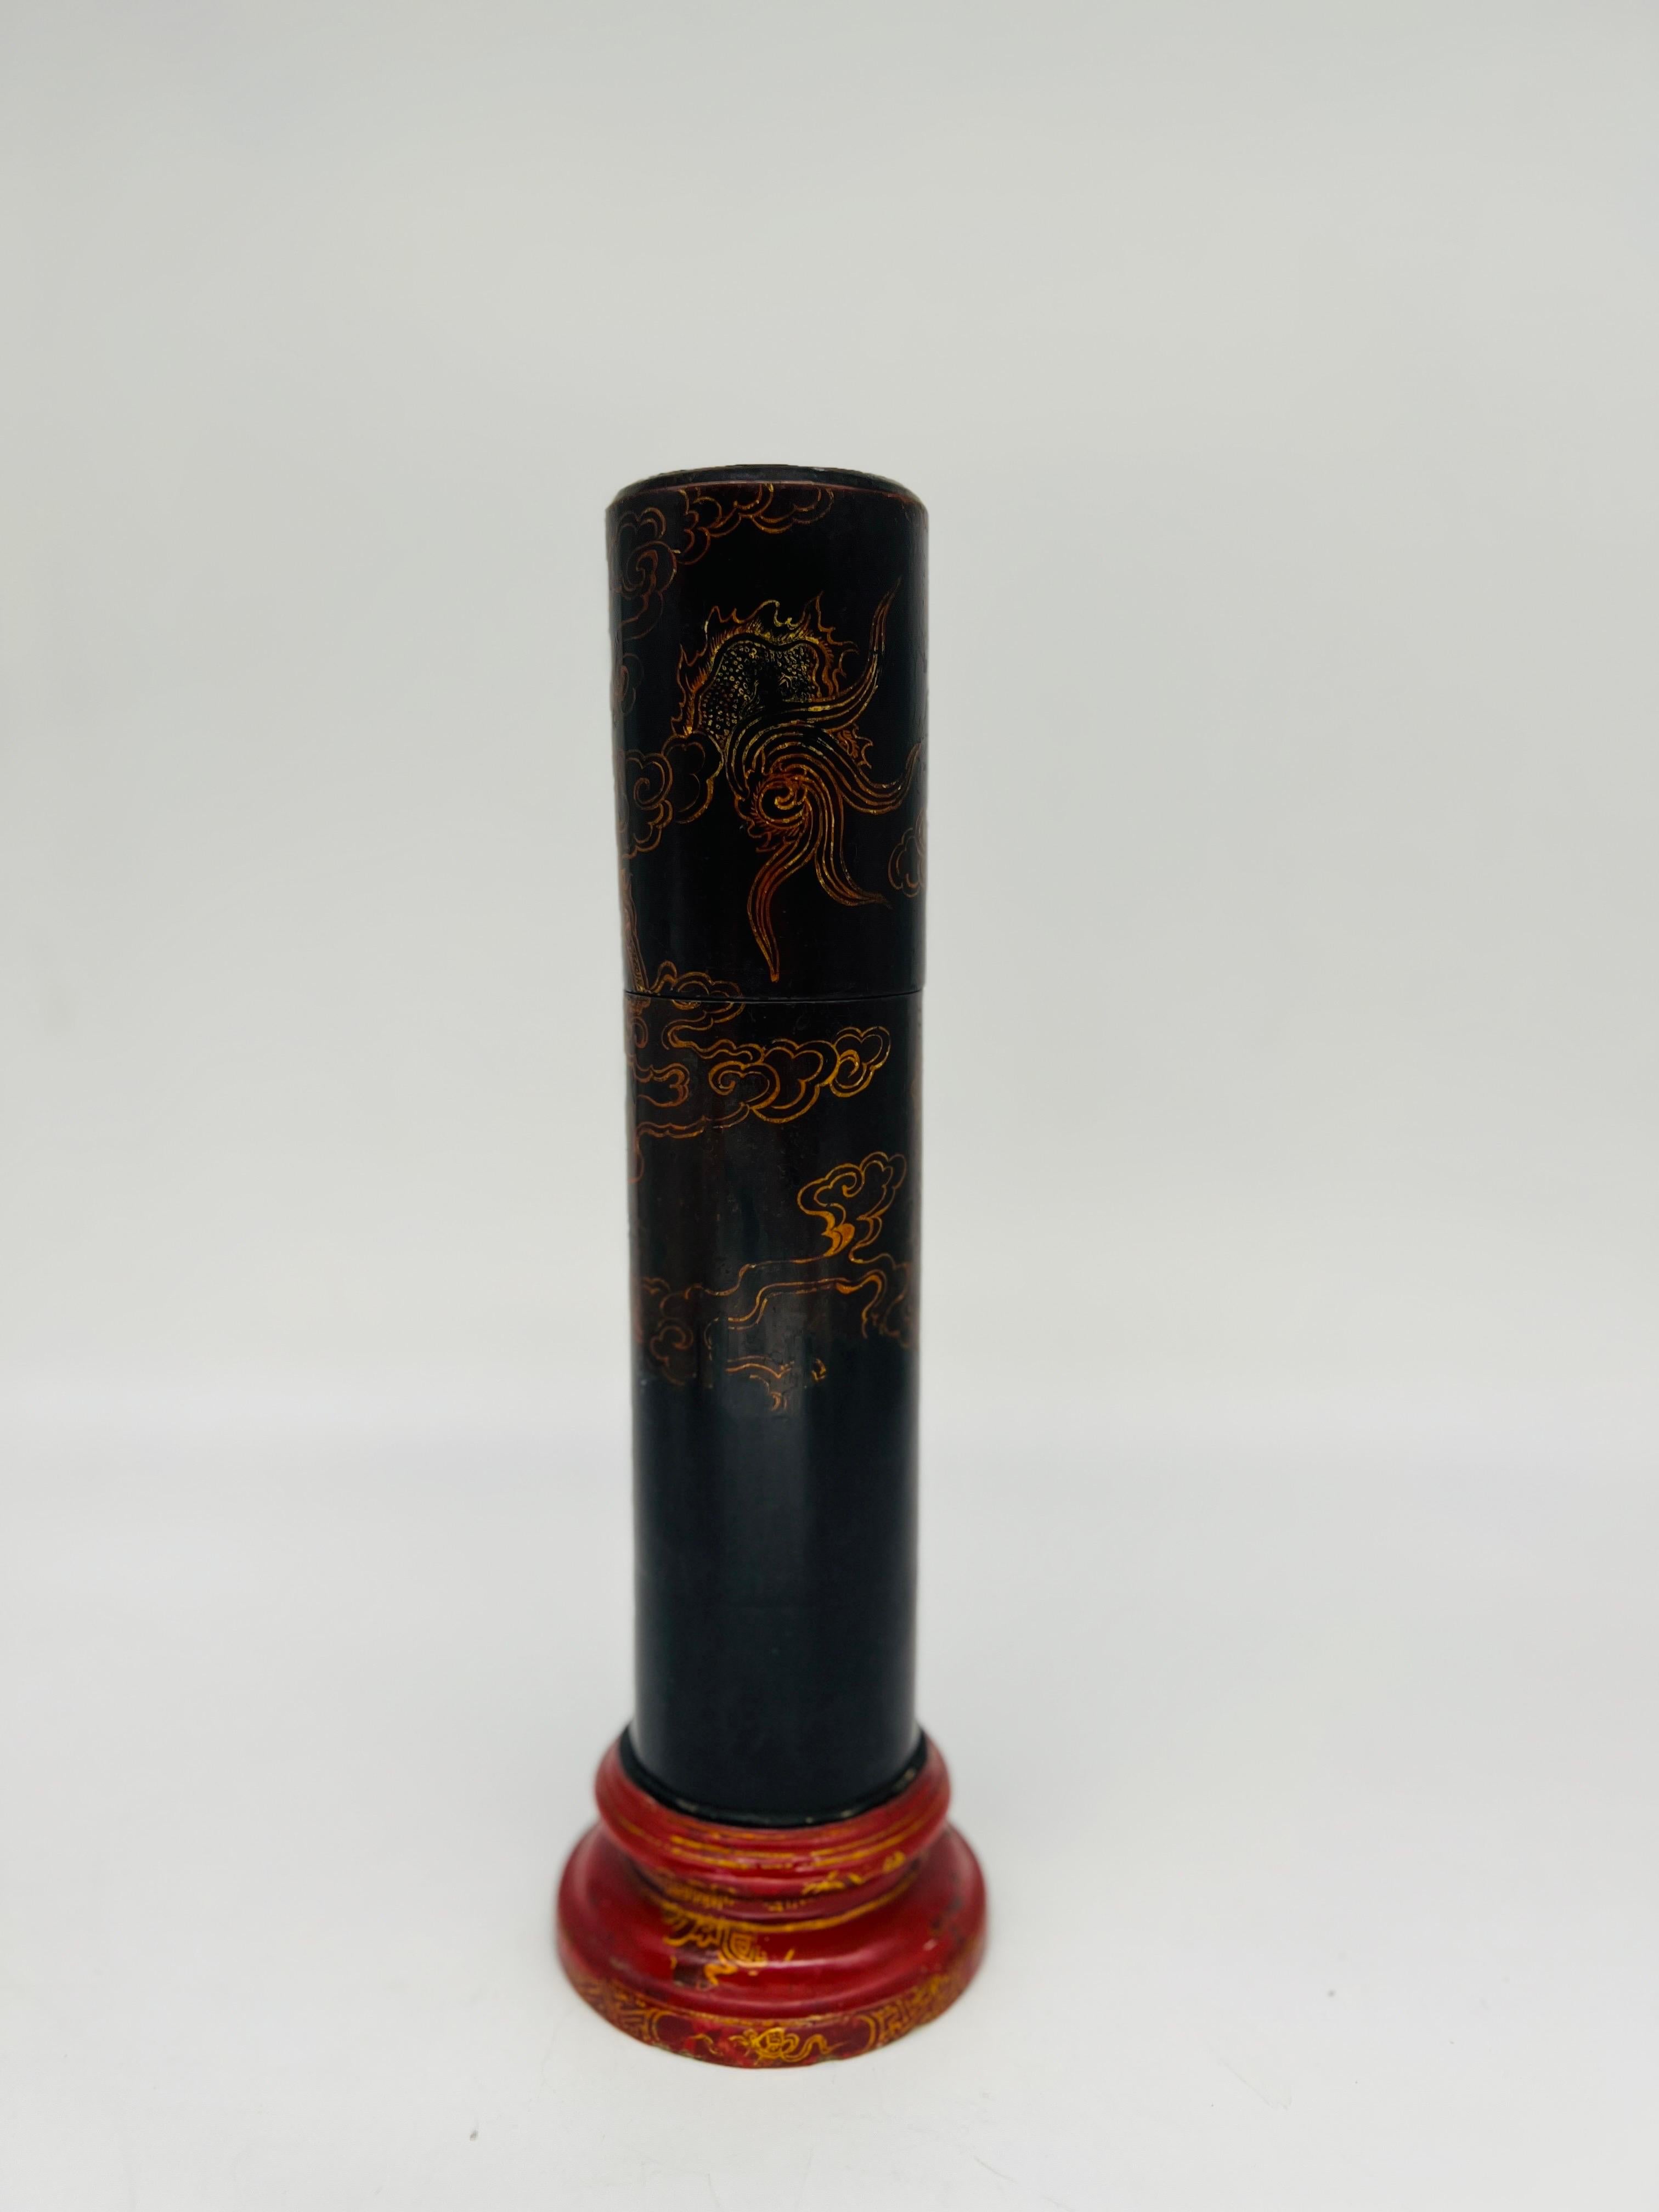 Vintage Japanese Lacquerware Cylindrical Fireplace Matchstrike Box For Sale 2